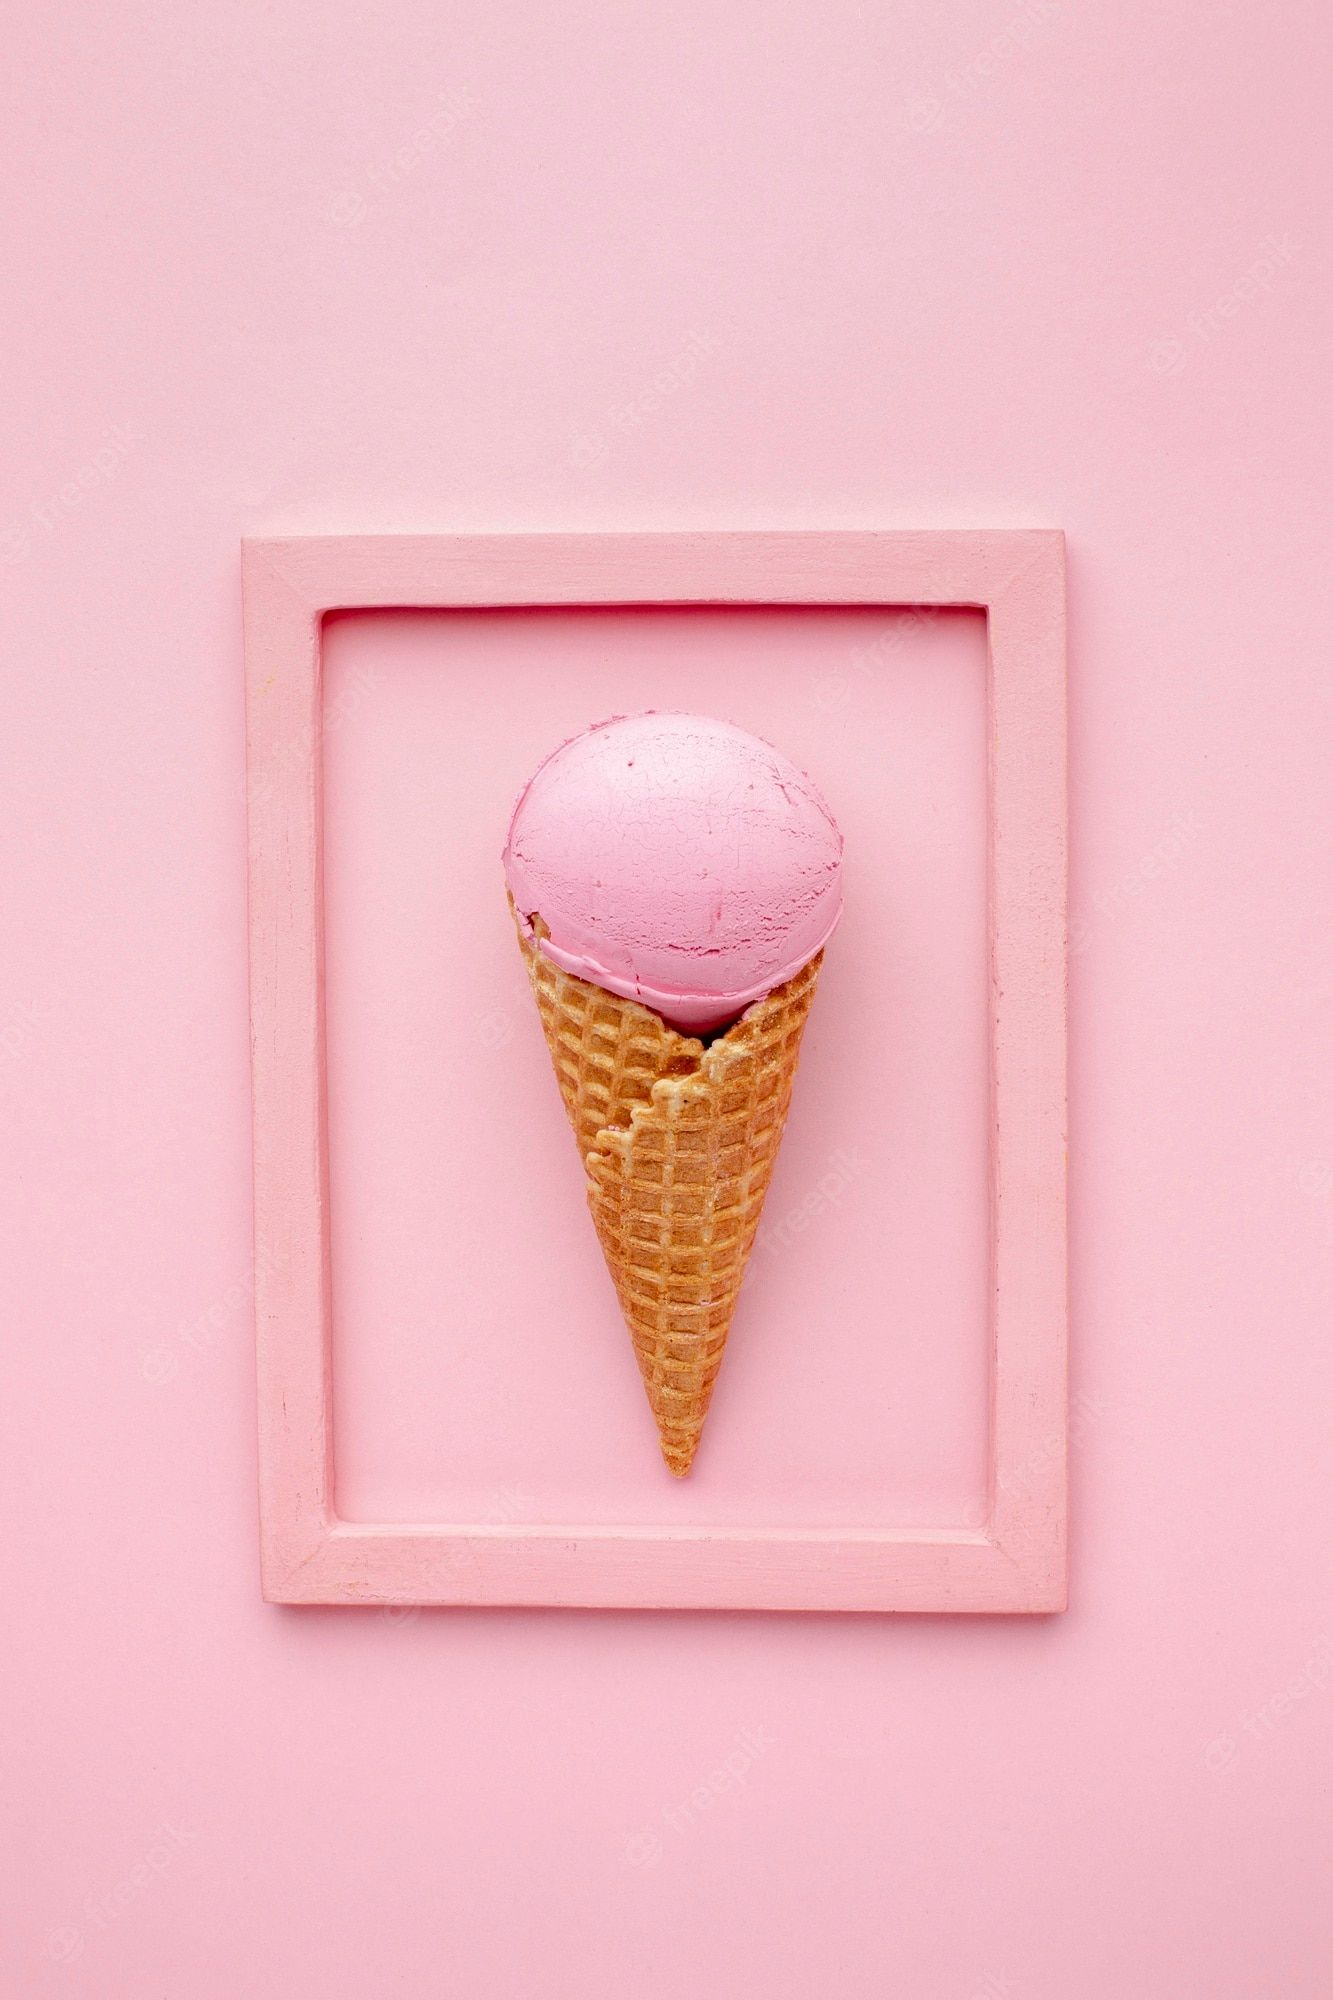 A pink ice cream cone in a pink frame on a pink background - Ice cream